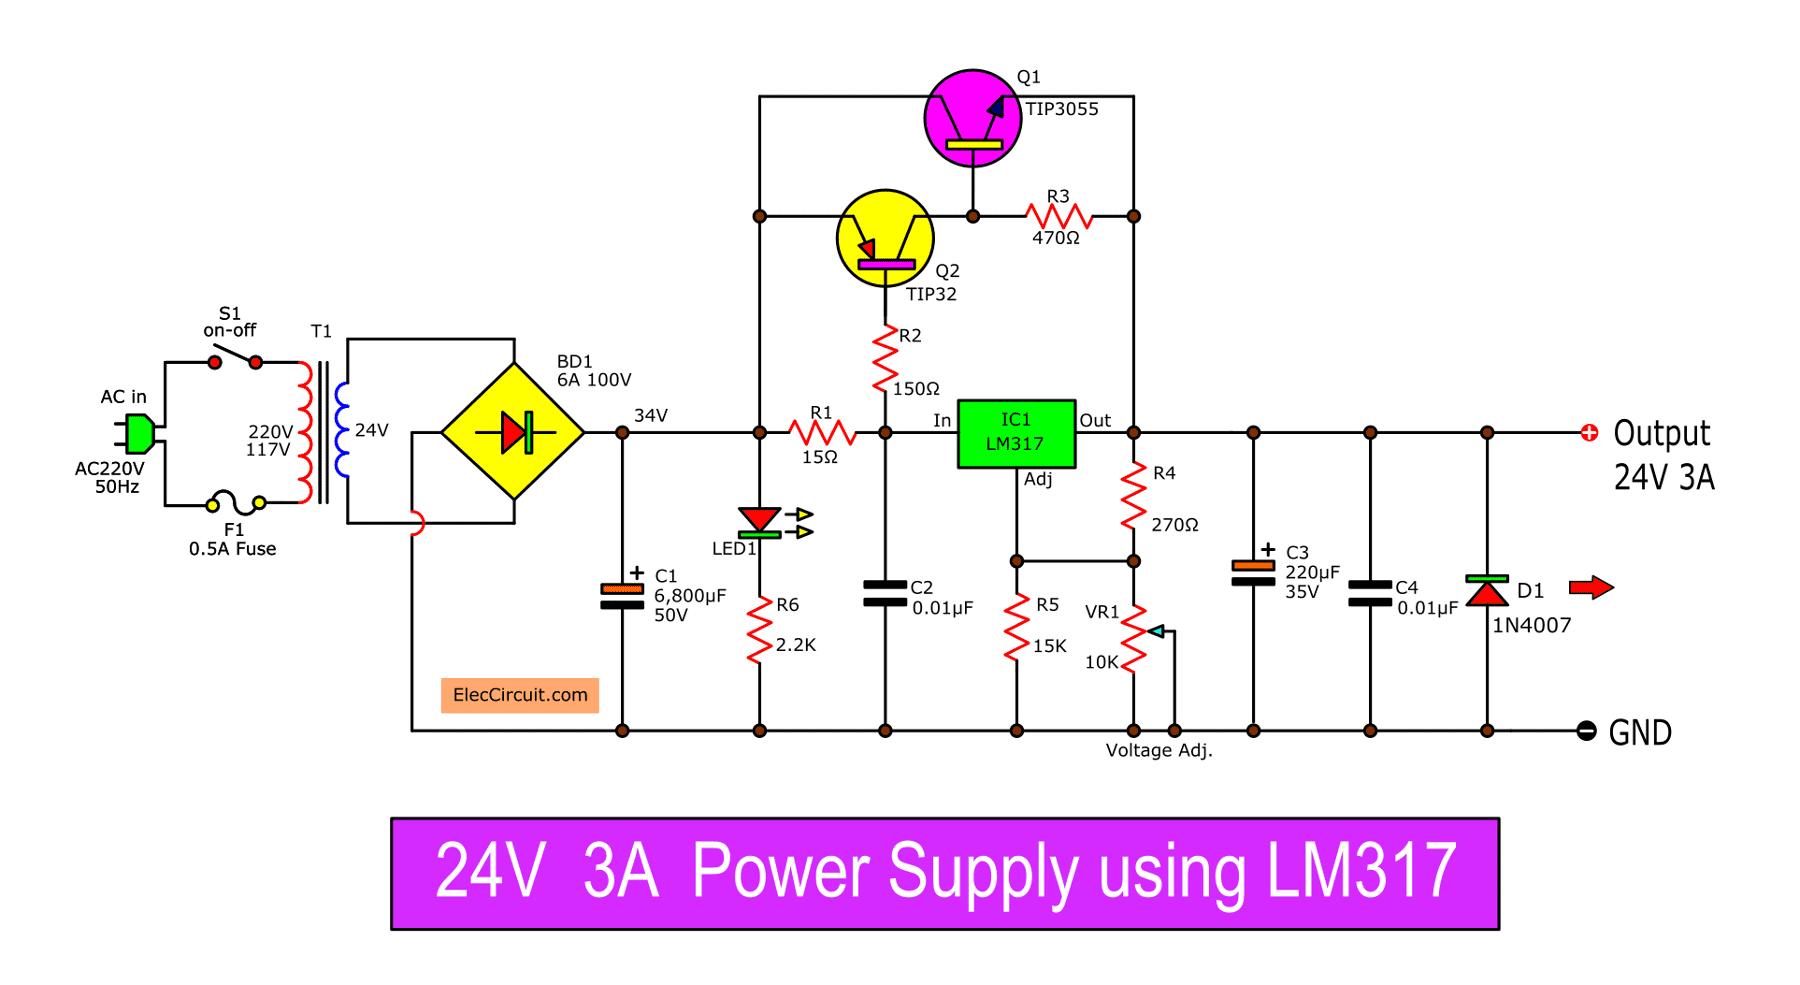 9 ways to build 24V power supply circuits with easy parts